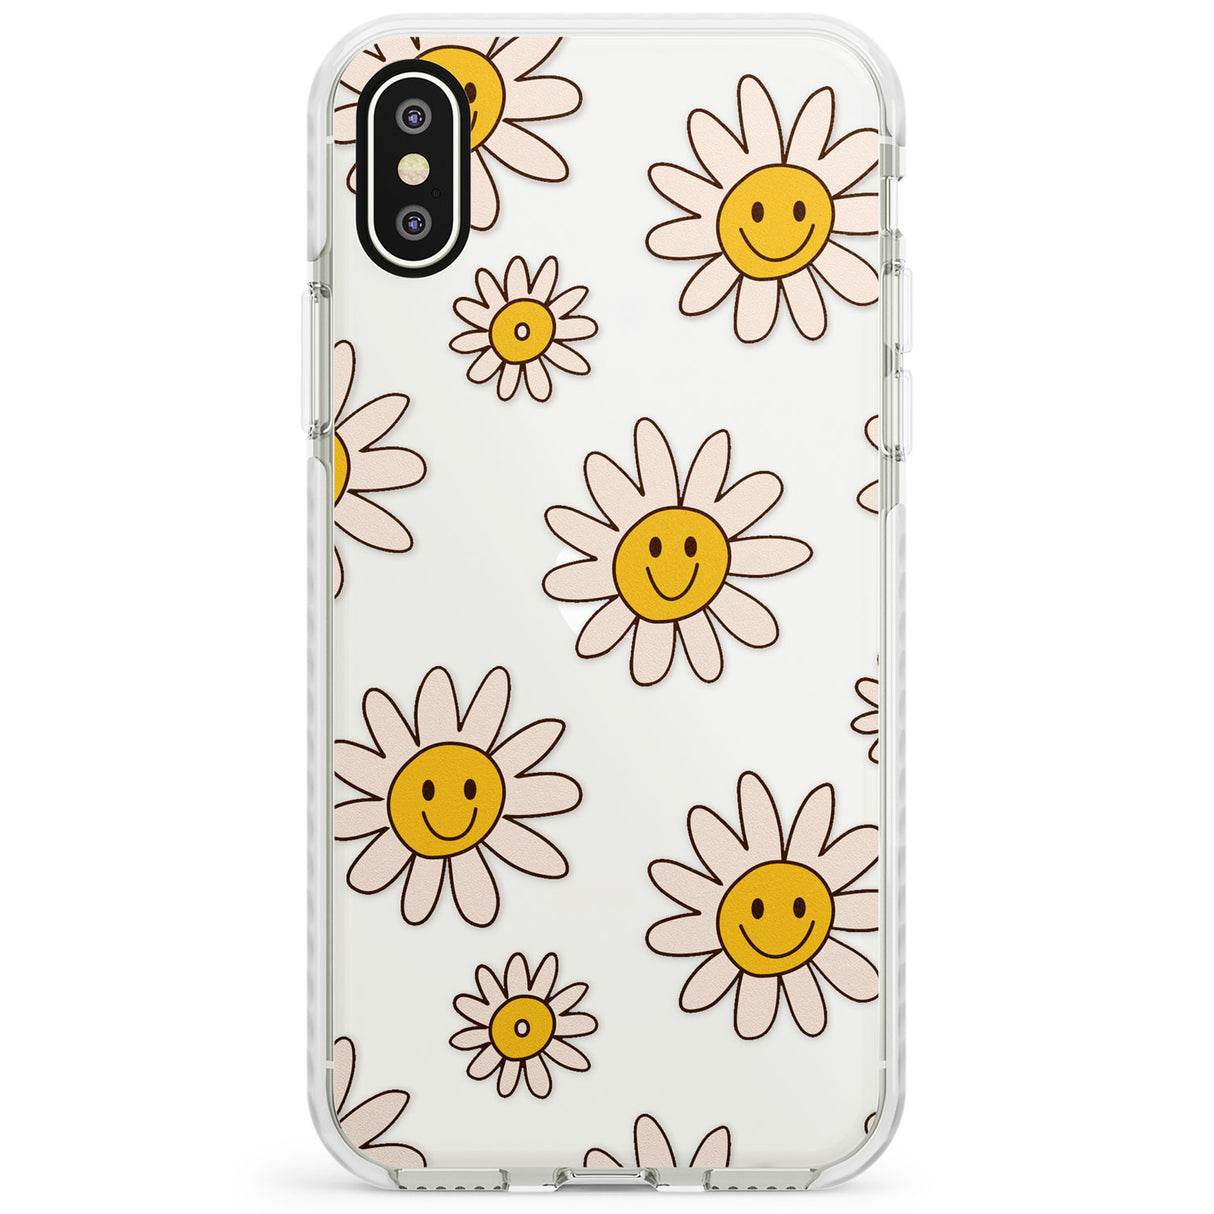 Daisy Faces Impact Phone Case for iPhone X XS Max XR